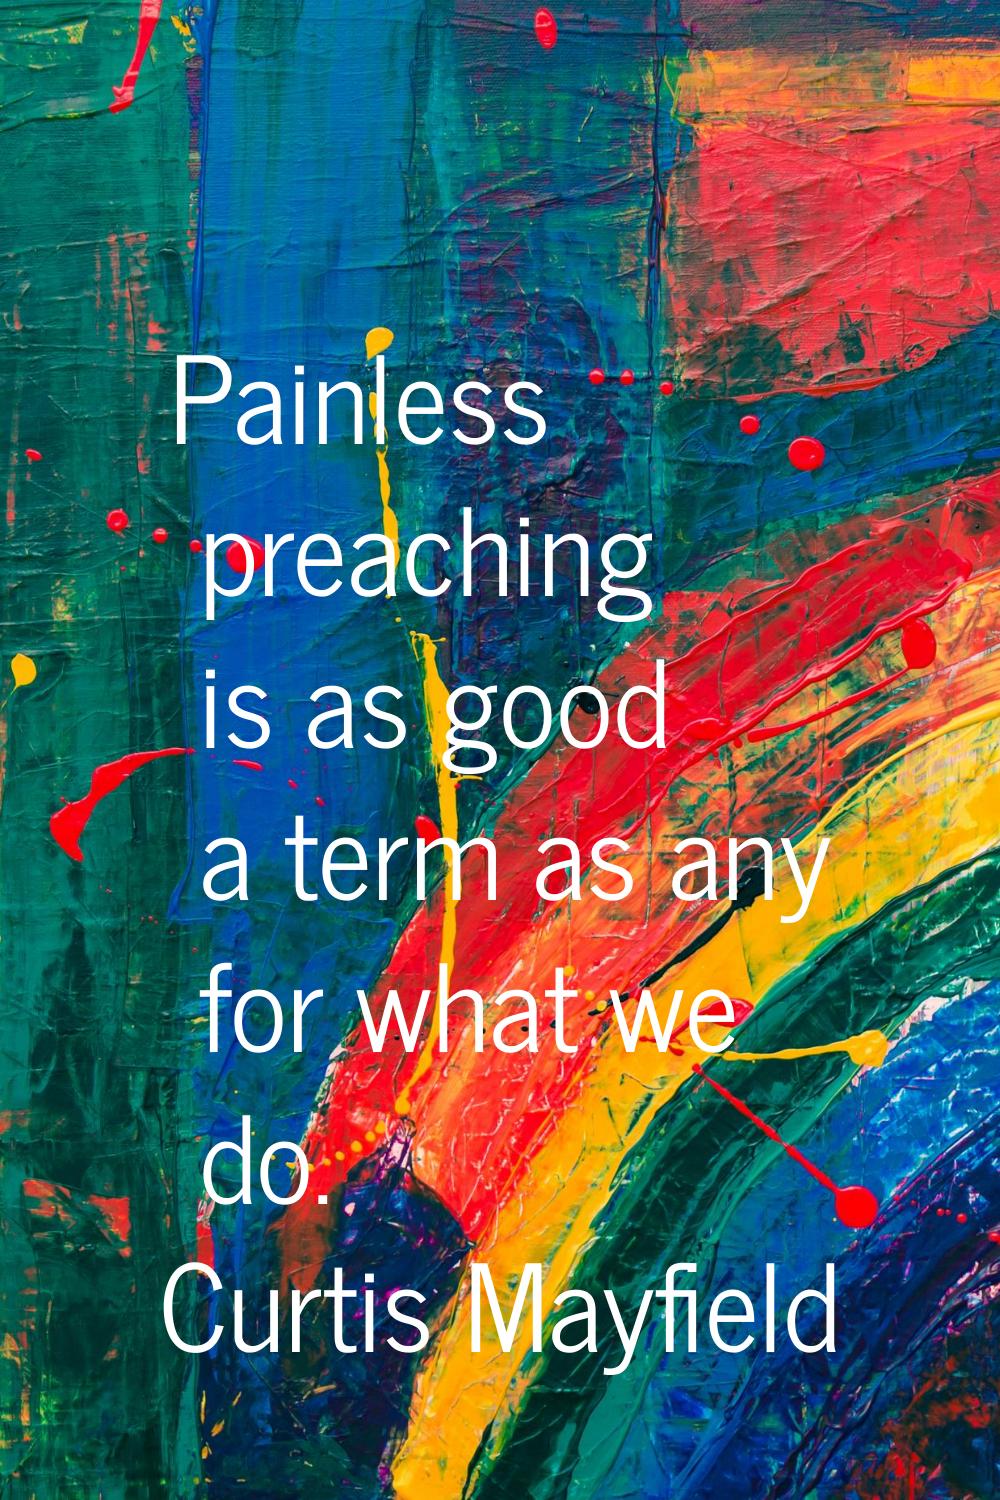 Painless preaching is as good a term as any for what we do.